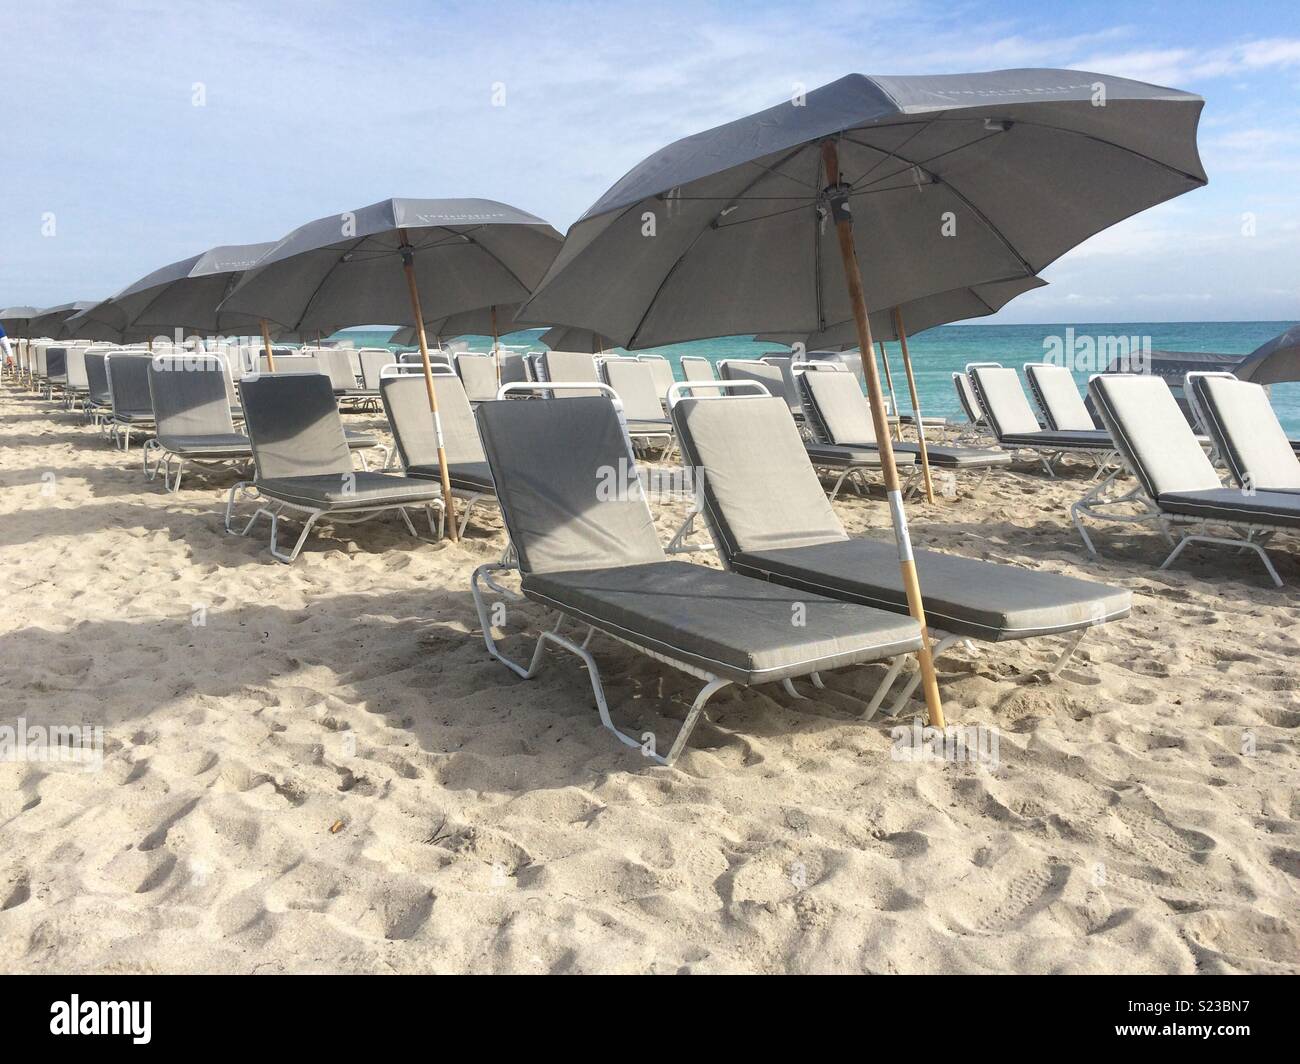 Sun loungers and umbrellas lined up on the sandy beach in Miami. Stock Photo